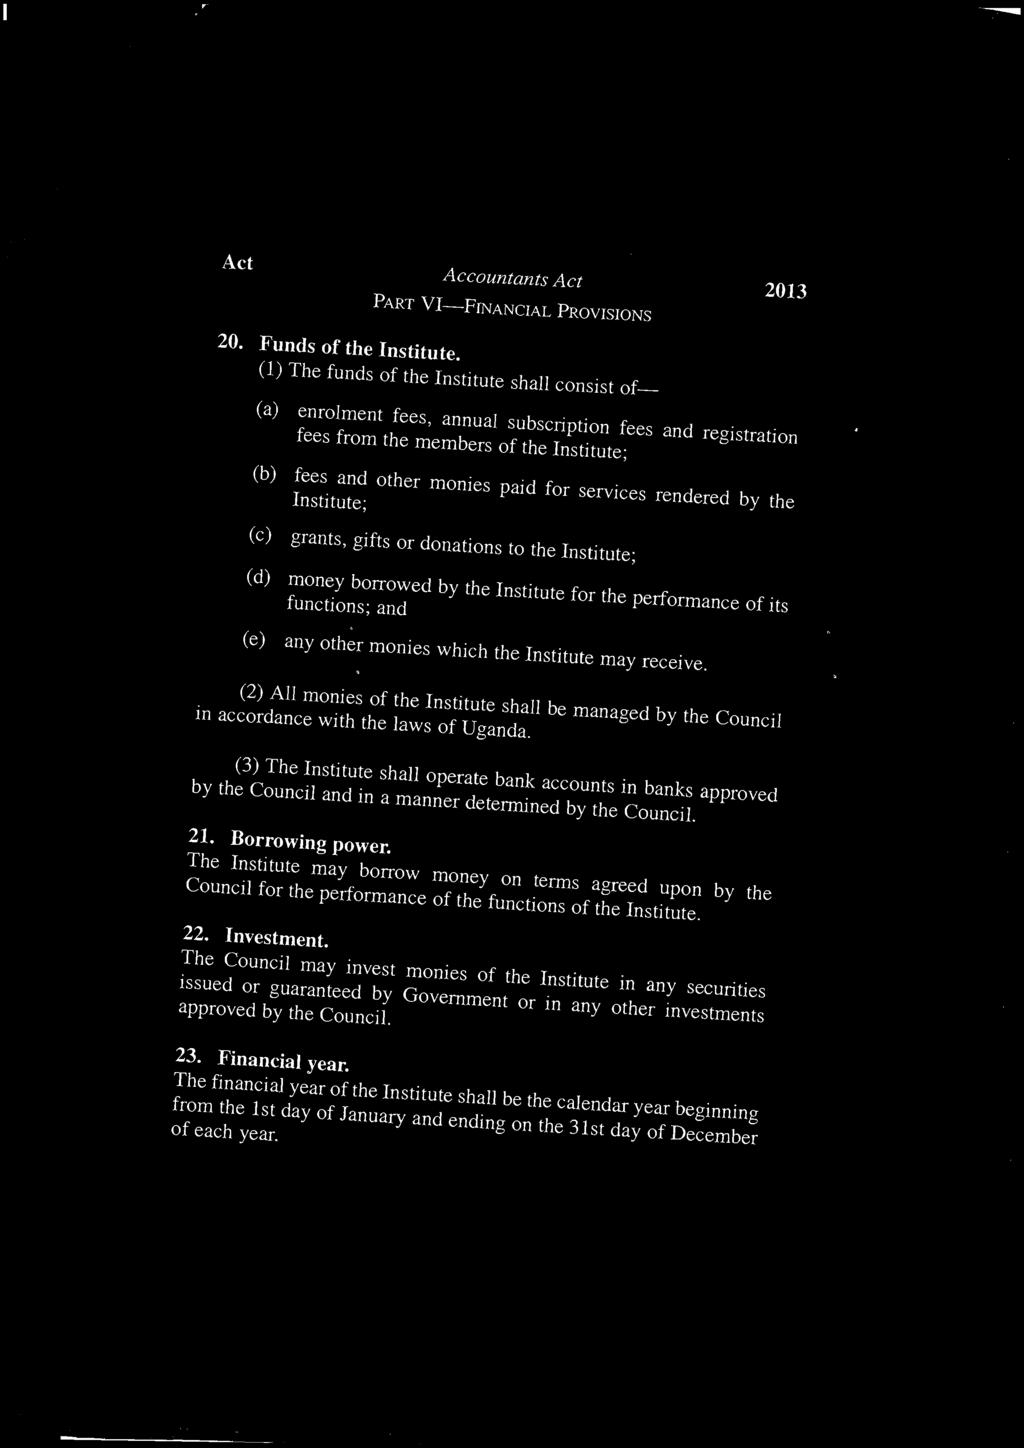 Act Accountants Act 2013 PART VI-FfNANCIAL PROVISIONS 20. Funds of the Institute.